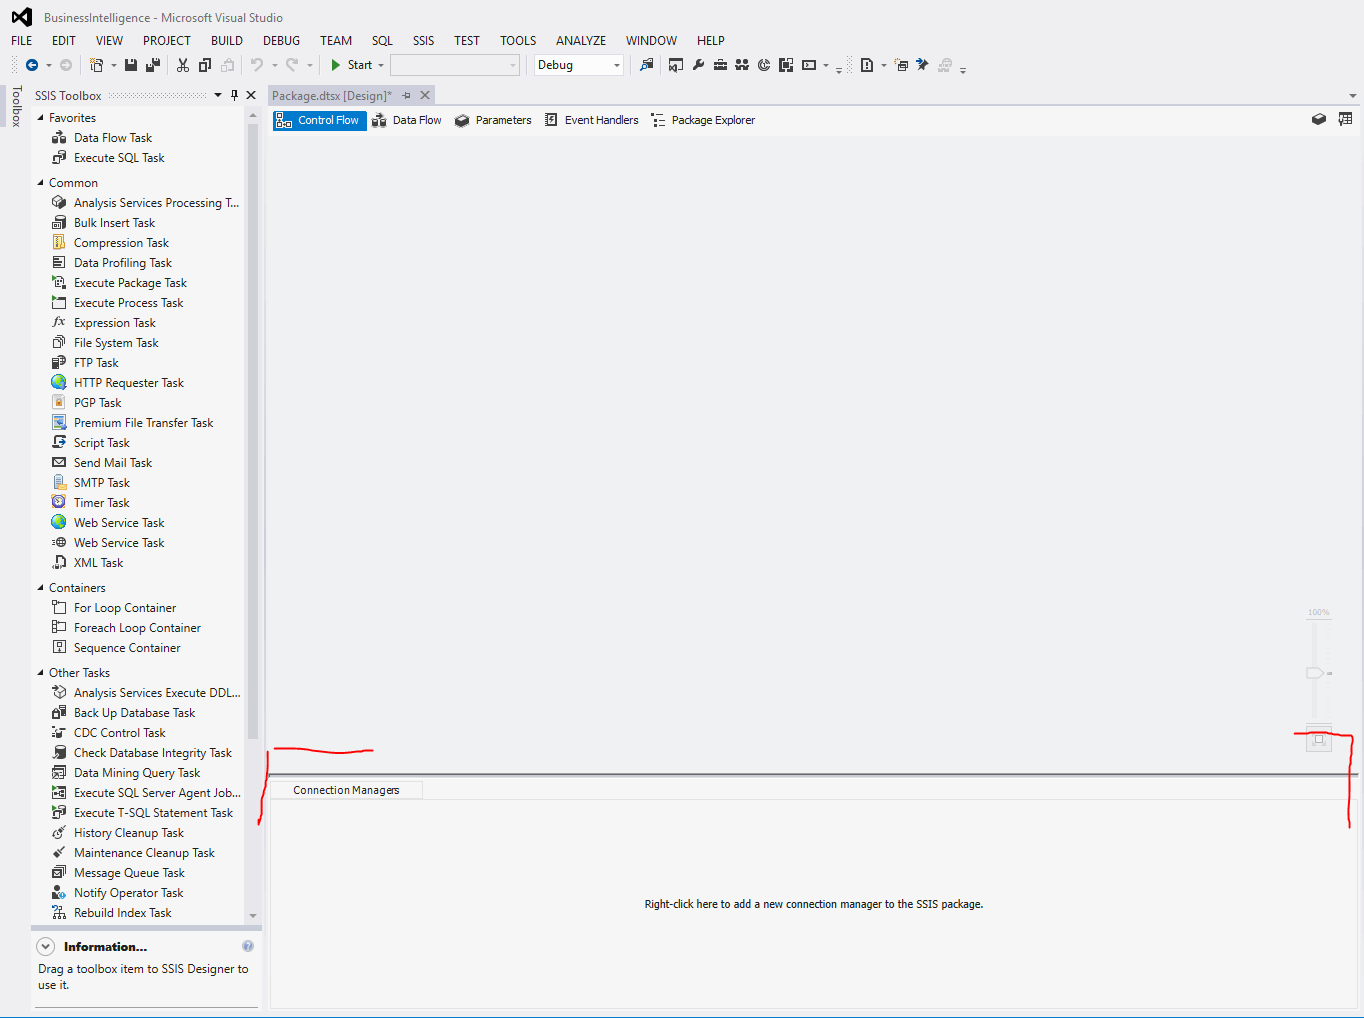 Connection manager area in SSIS